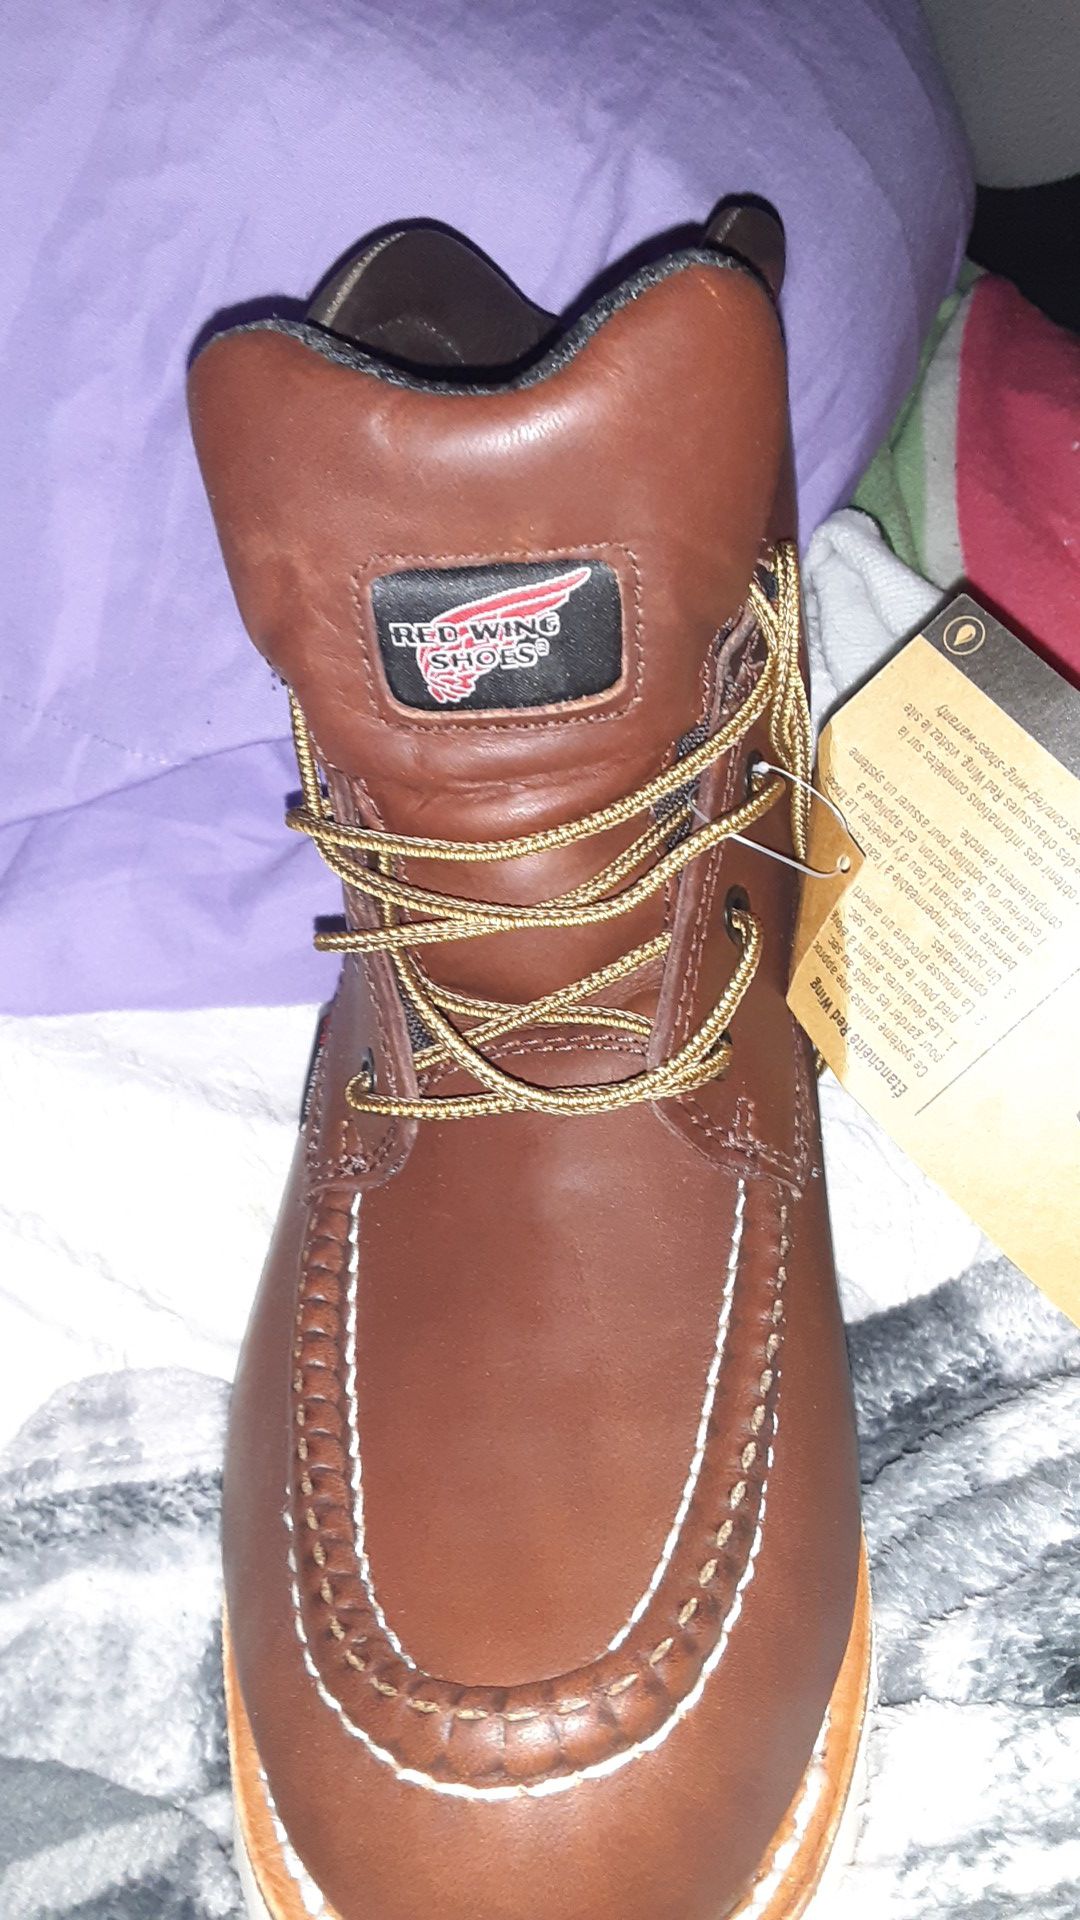 REDWING BOOTS